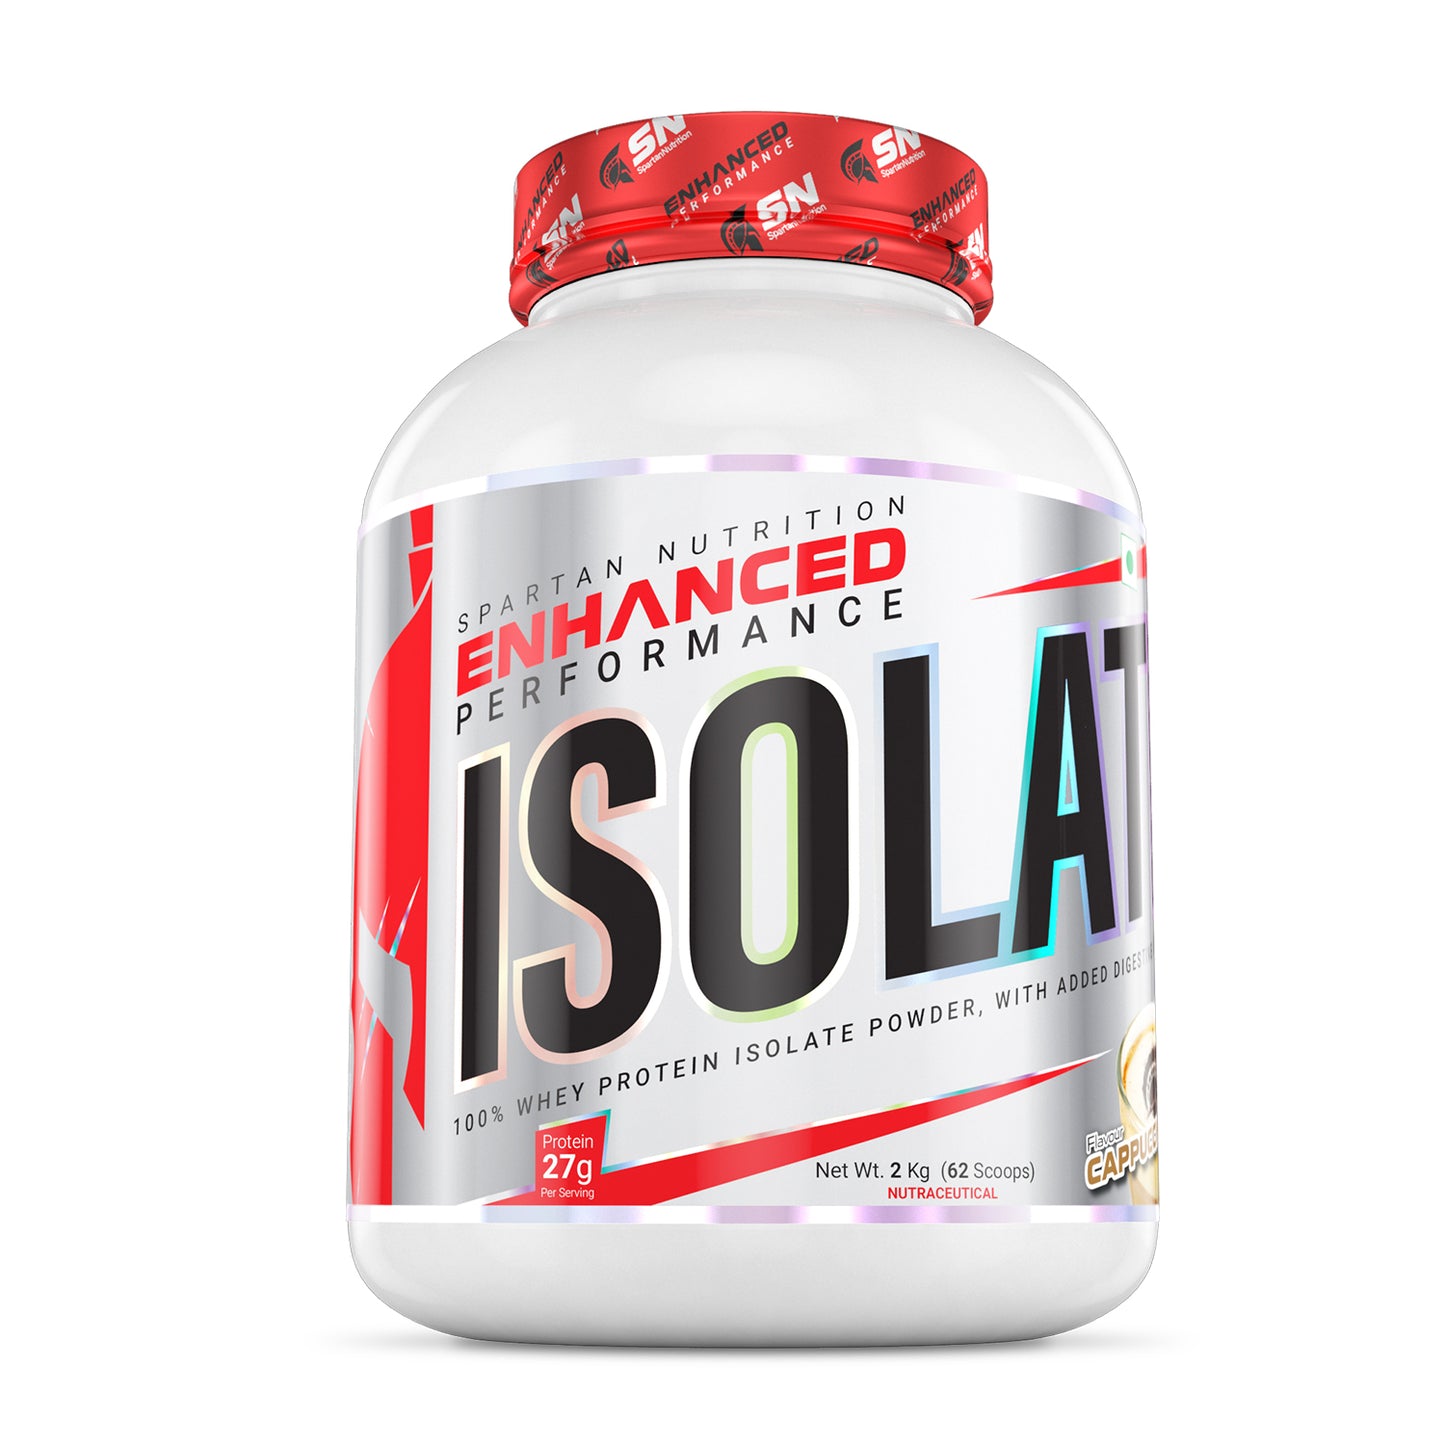 Spartan Nutrition Enhanced Performance Isolate Protein – 2 kg, with Complete Amino Acid Profile, Protein - 27 g, Low Calories- 117 Kcal, Digezyme – 75mg Per Serving and Zero Added Sugar